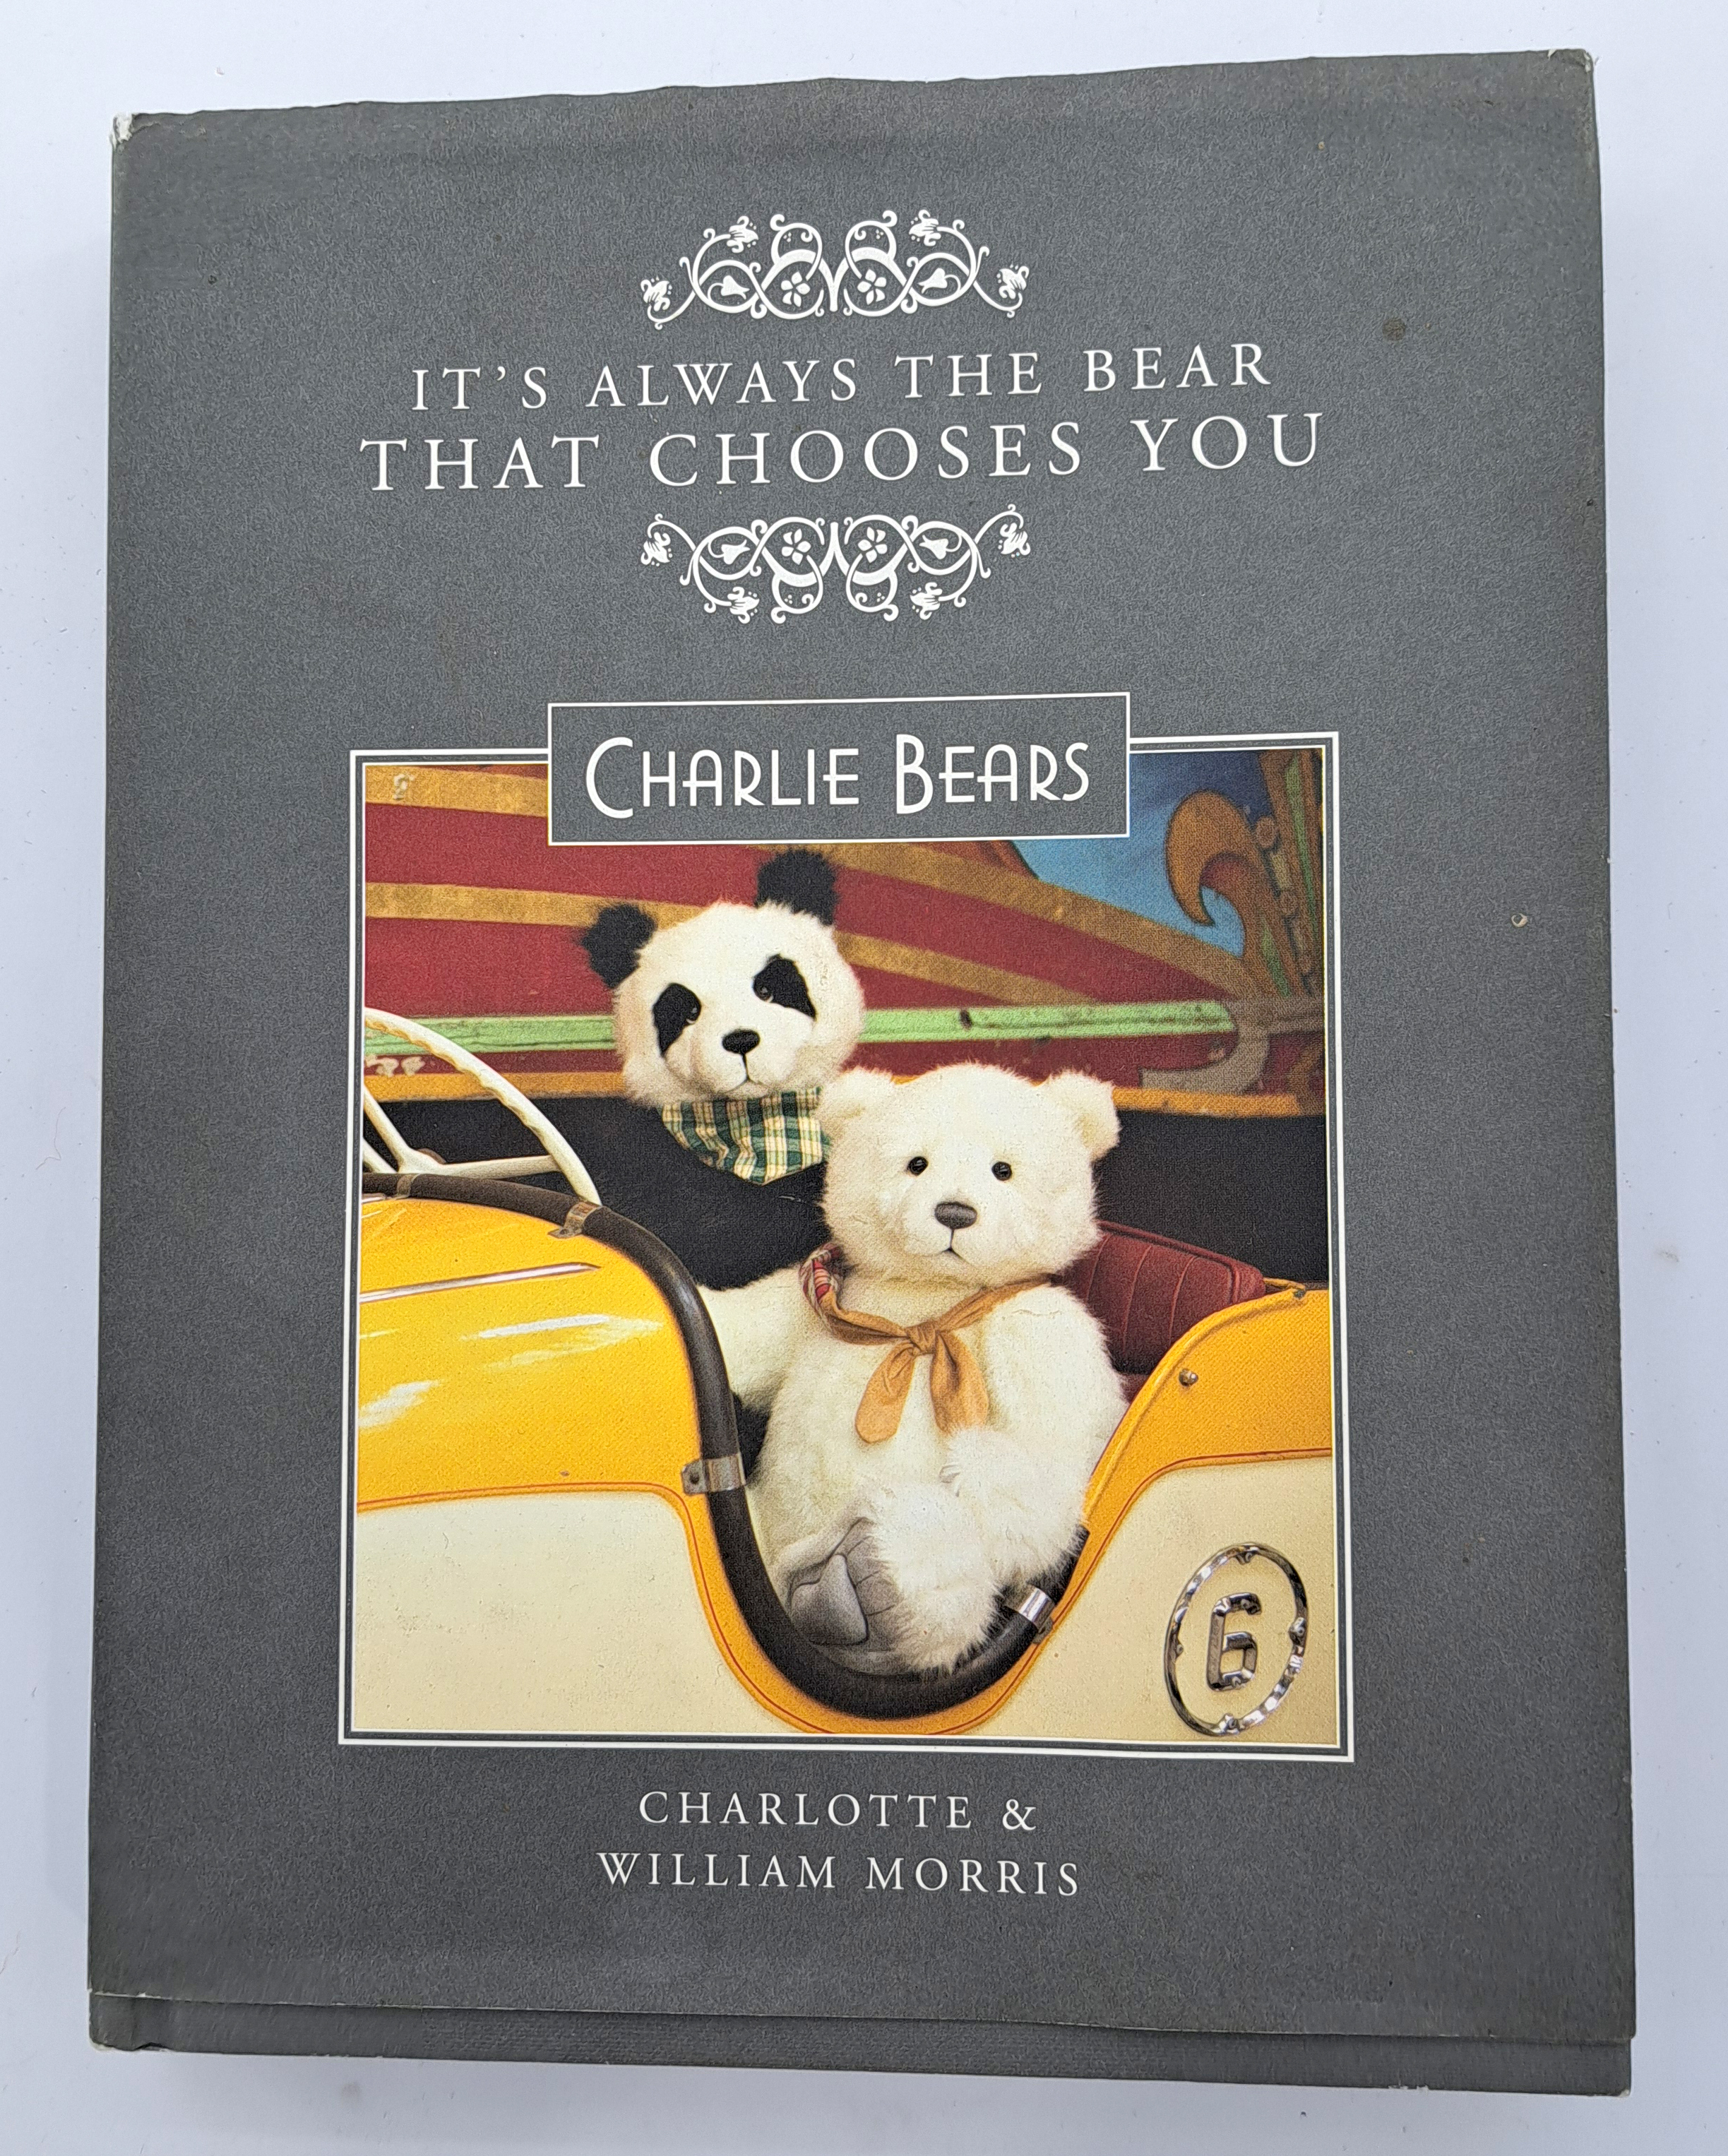 Charlie Bears reference book: It's the Bear that Chooses You by Charlotte and William Morris